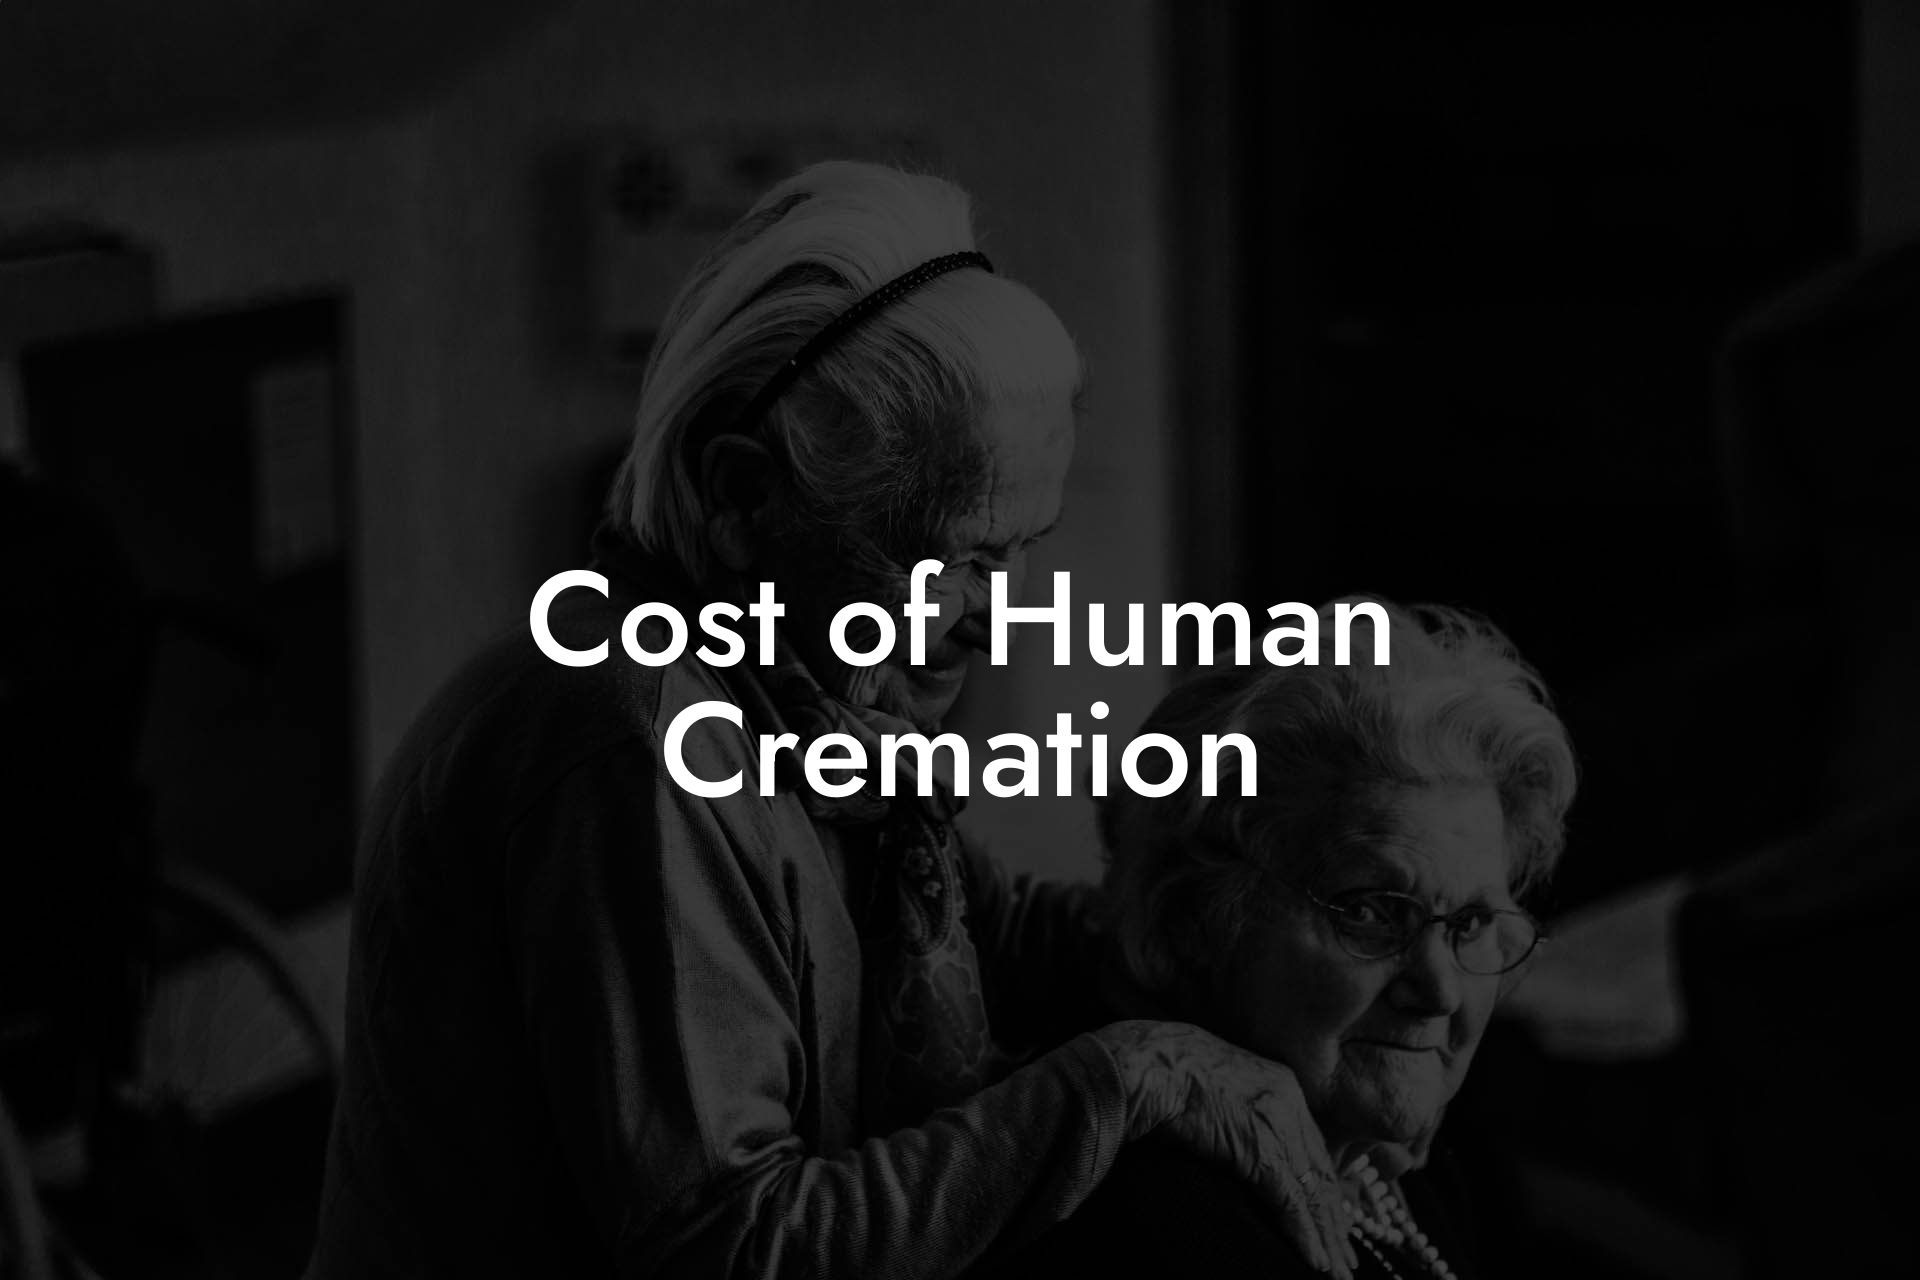 Cost of Human Cremation